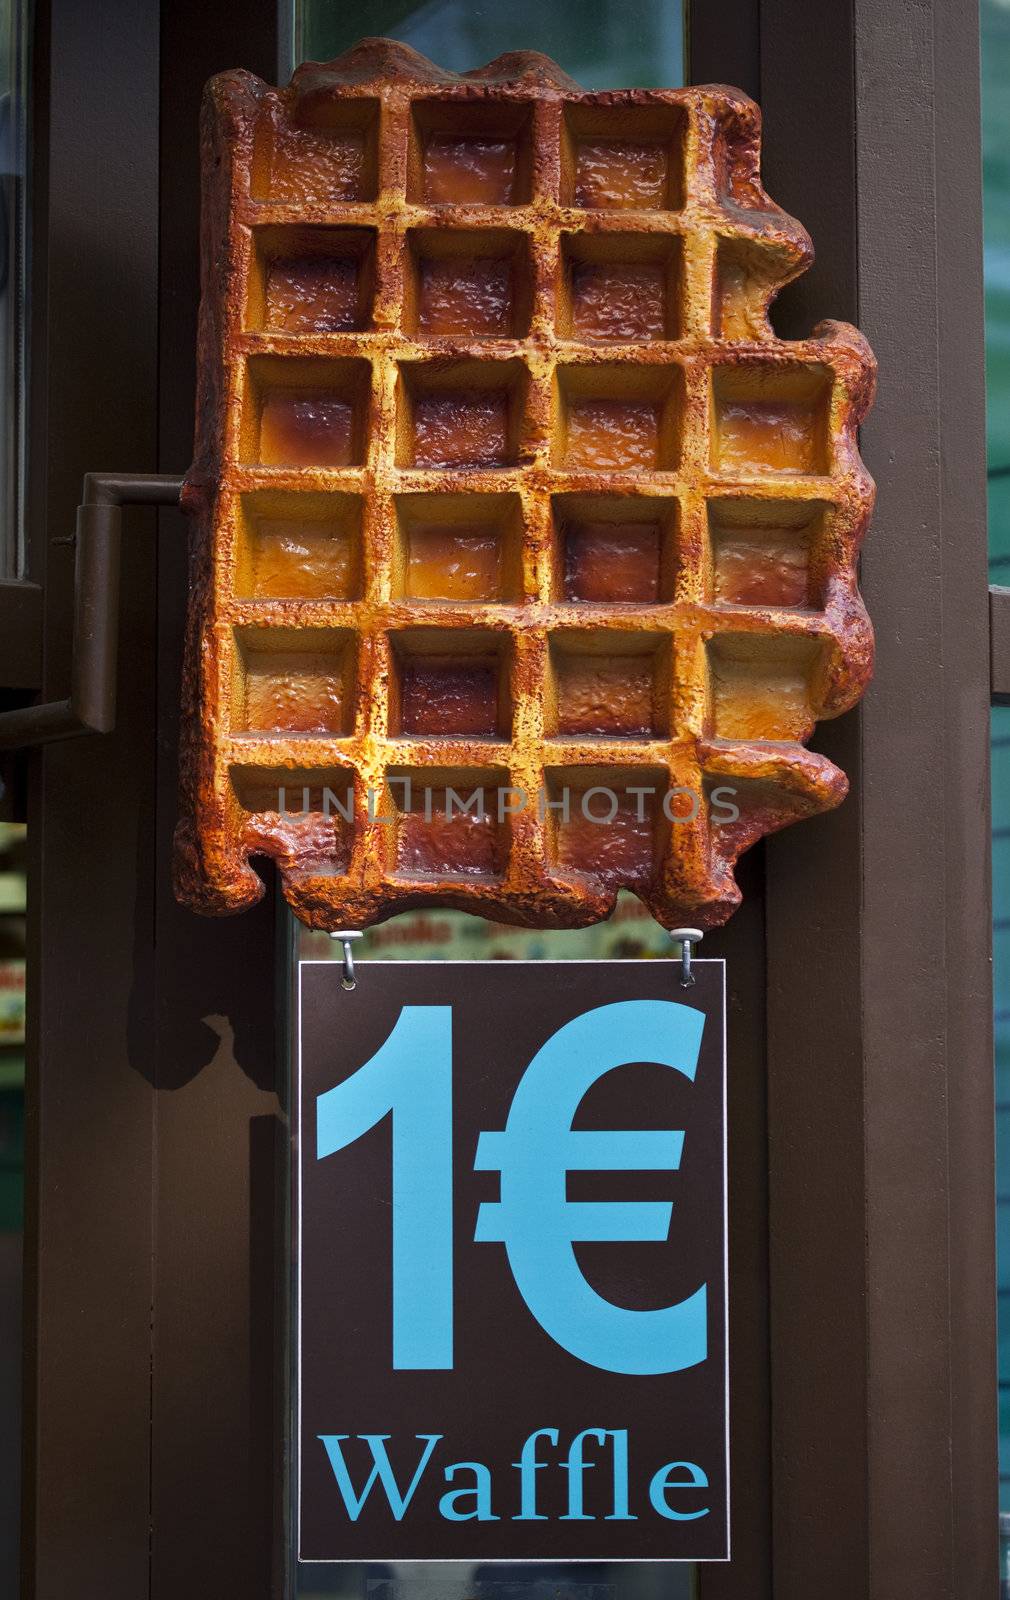 One Euro for a Belgian Waffle in Brussels.